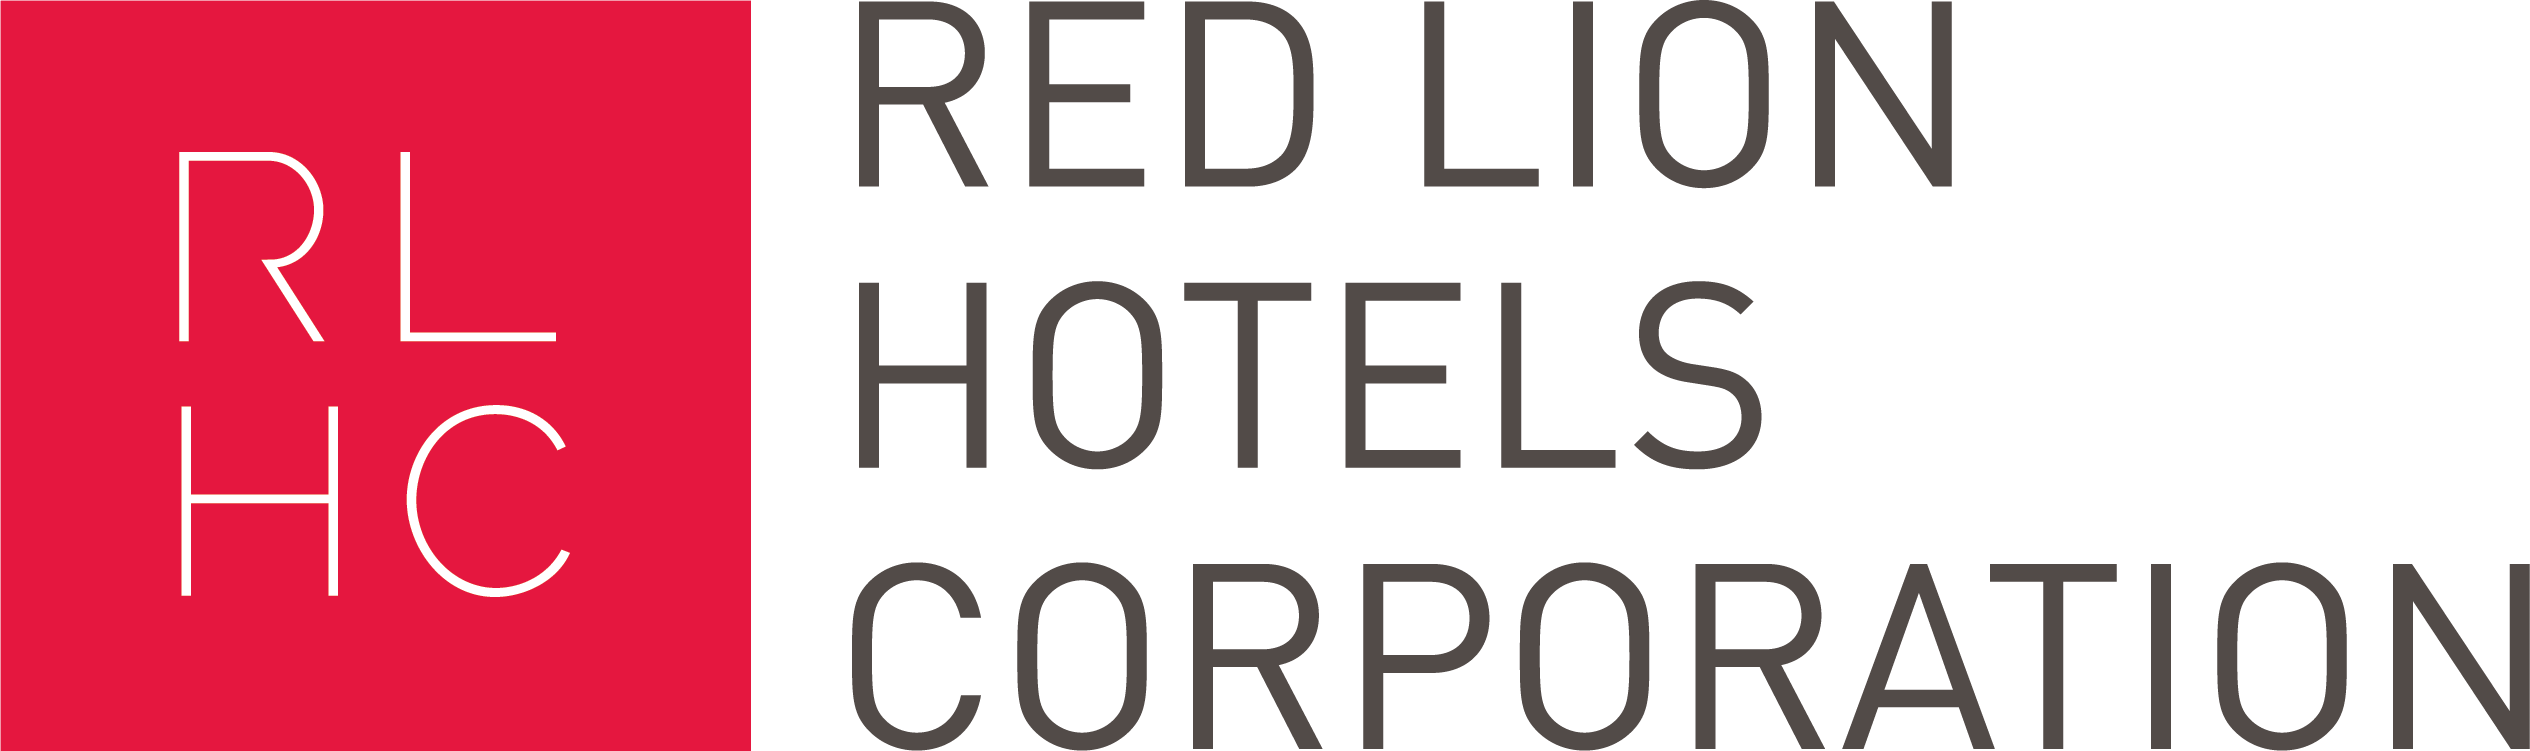 Red Lion Hotels Corporation Logo - Red Lion Hotels Corp logo - No Vacancy